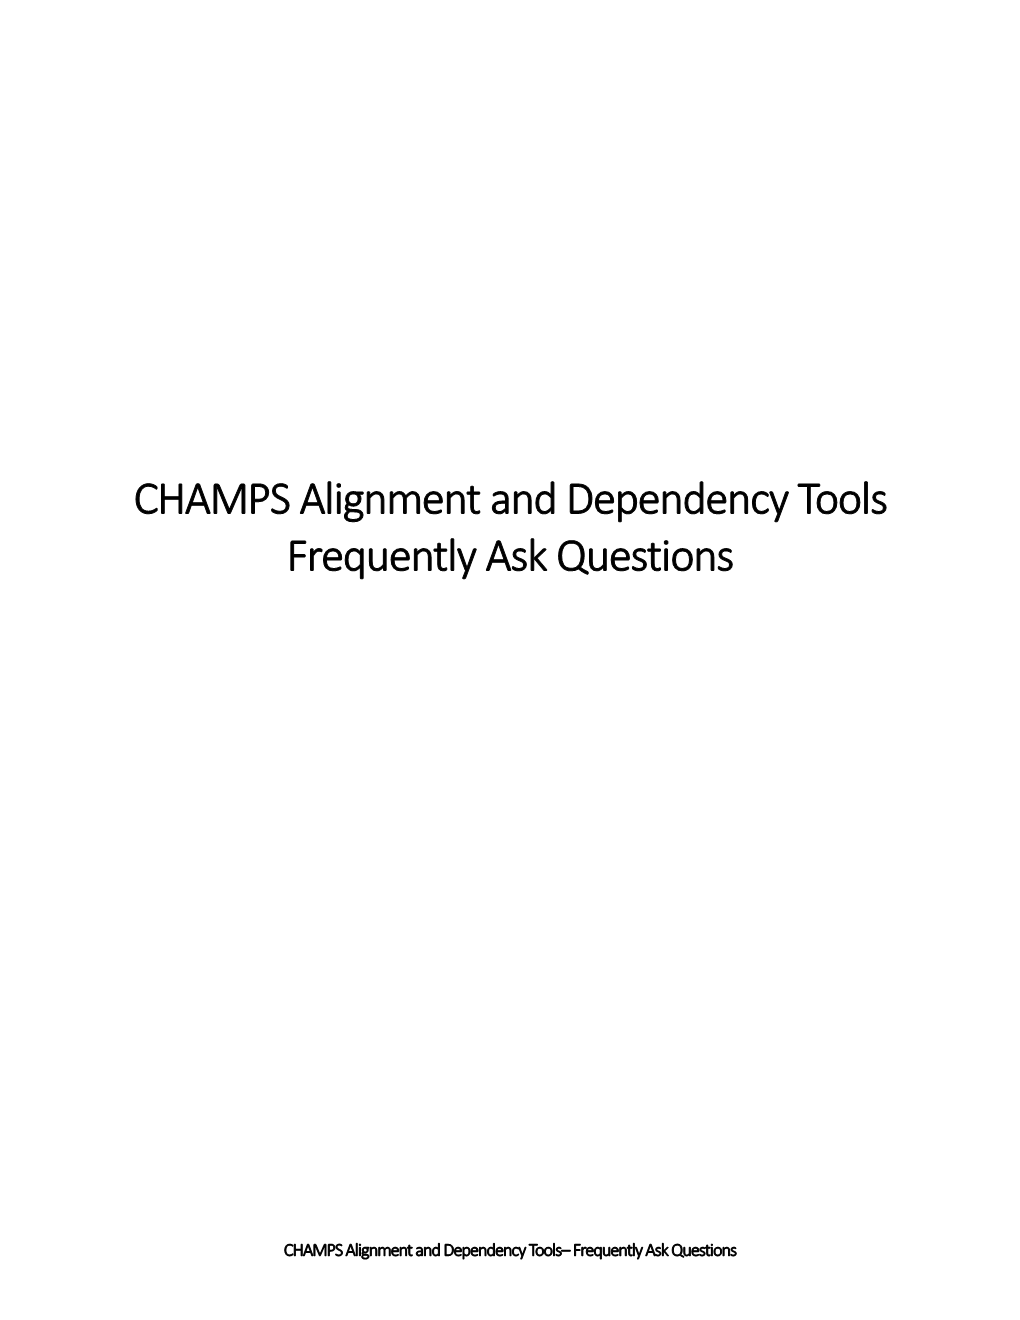 CHAMPS Alignment and Dependency Tools Frequently Ask Questions